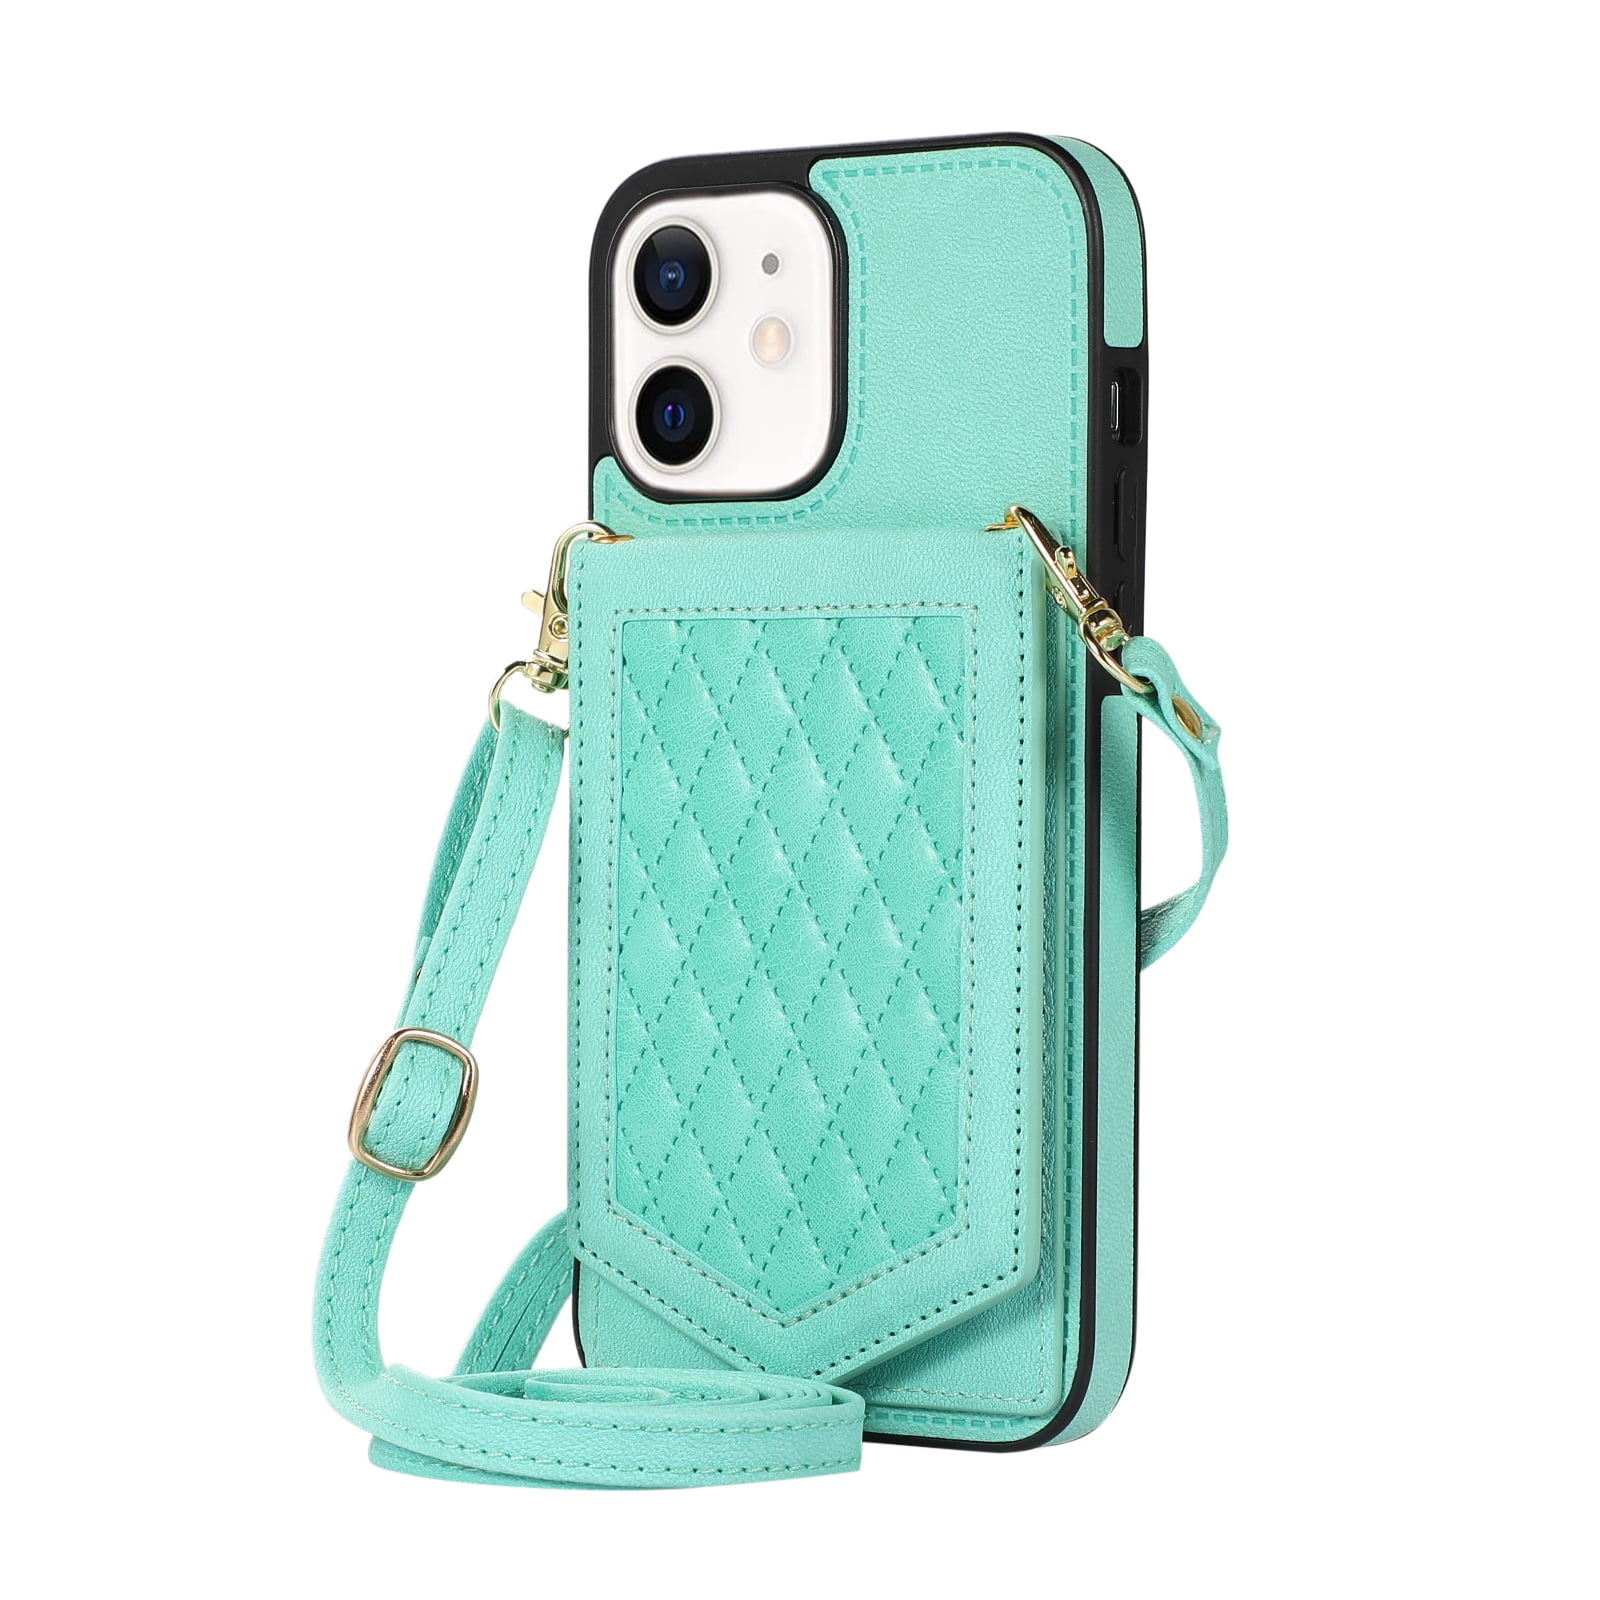 iPhone Purse Case for Women | Iphone leather case, Iphone cases, Iphone  purse